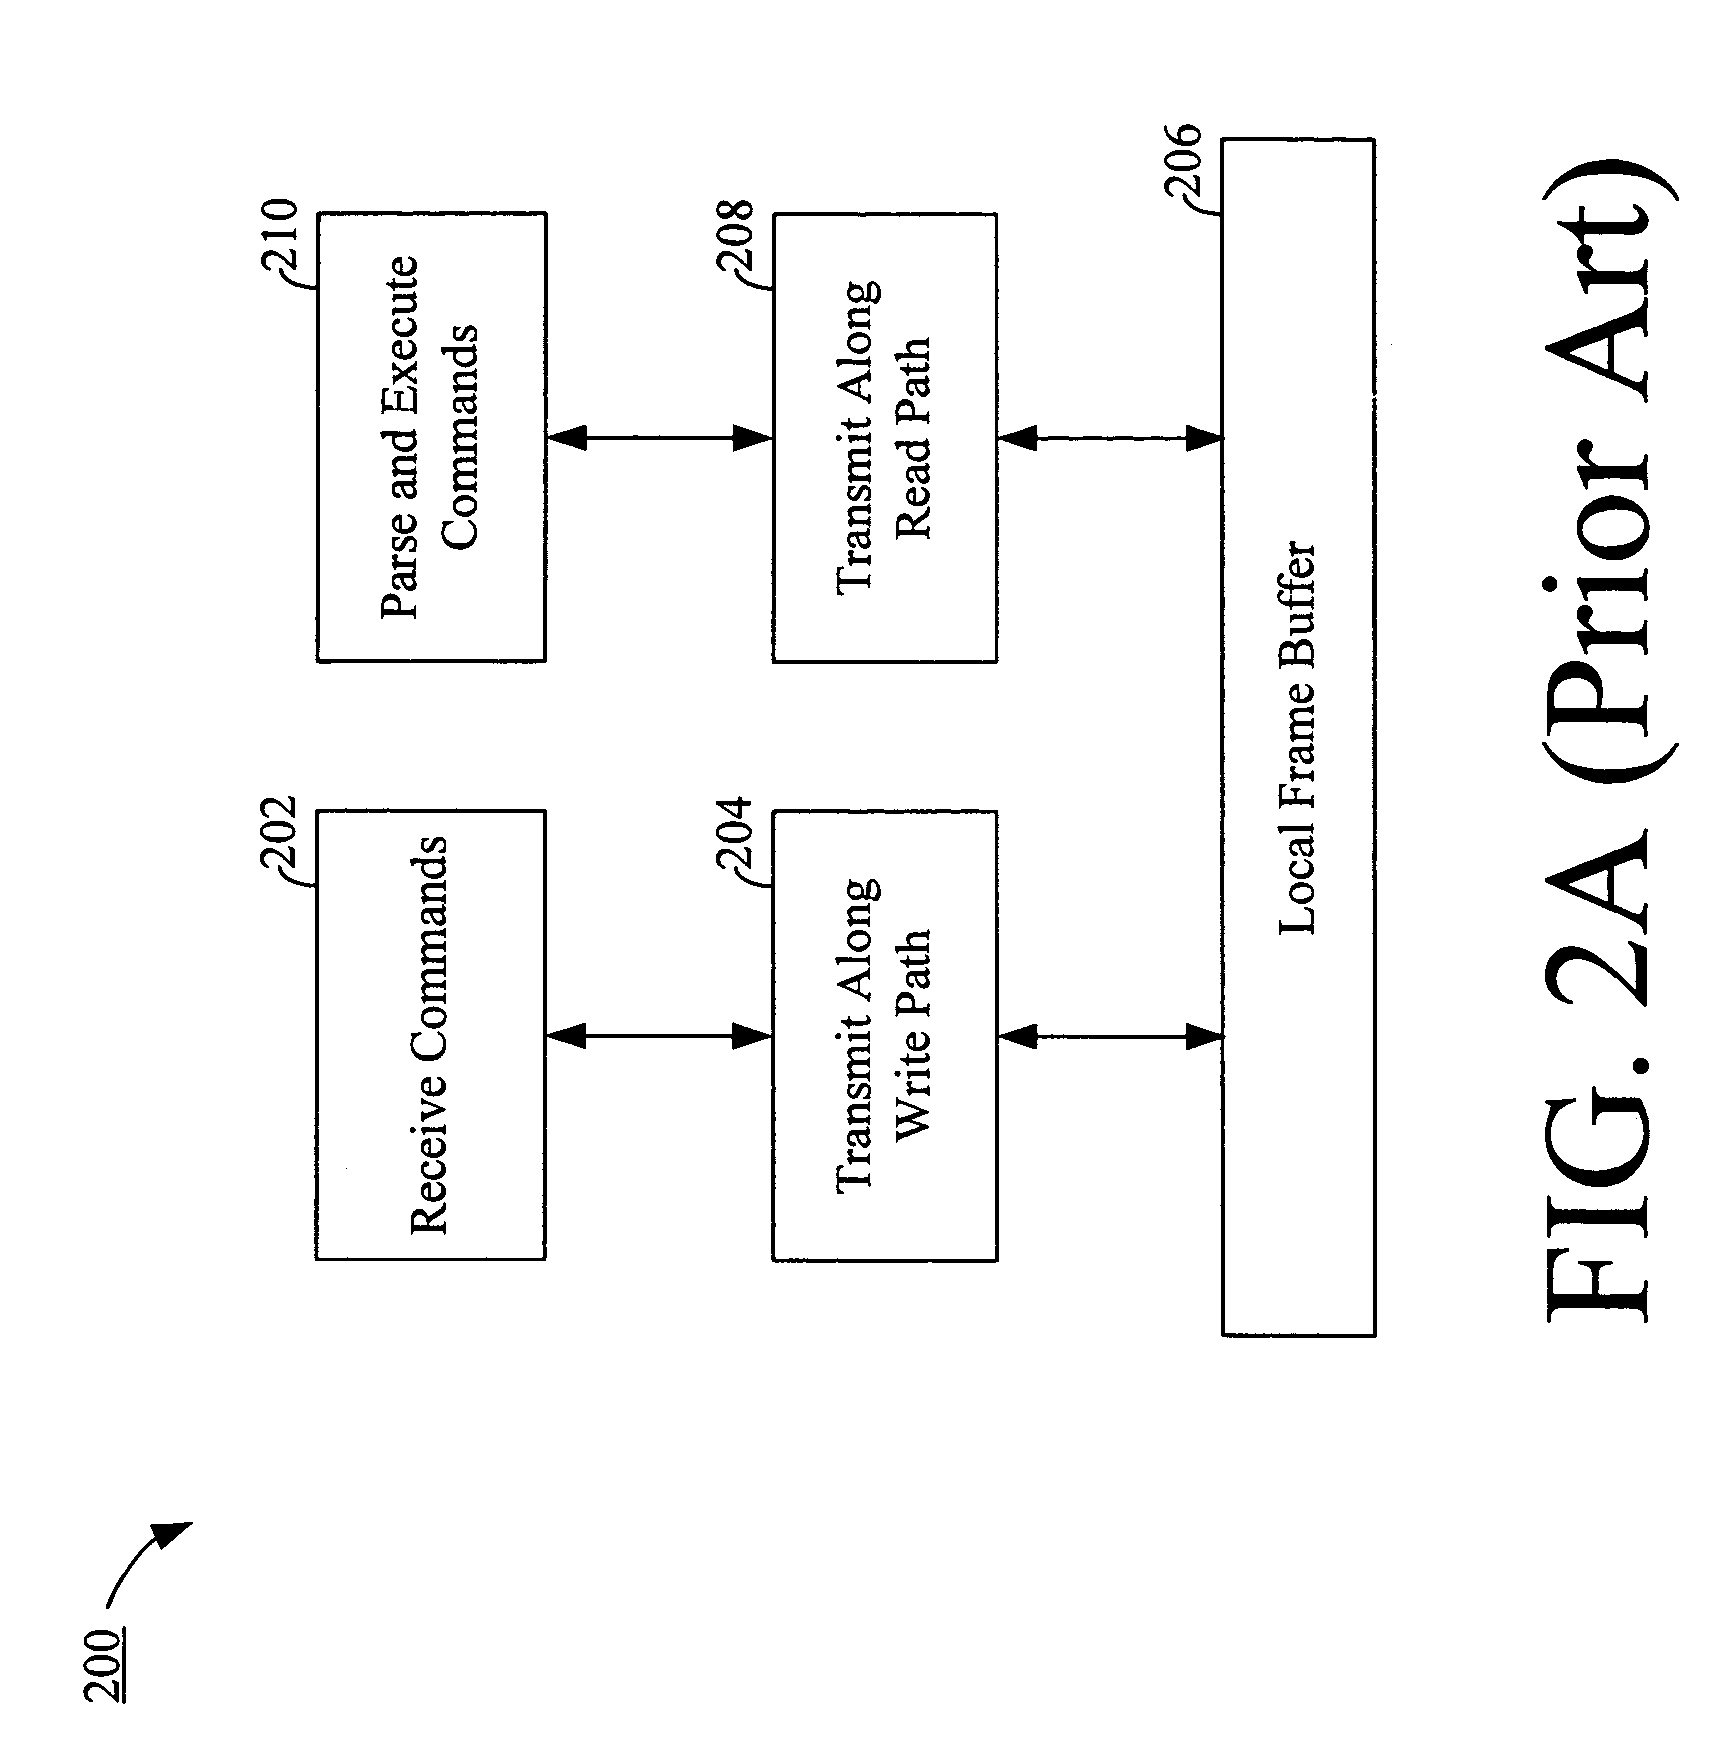 Method and circuit for command integrity checking (CIC) in a graphics controller